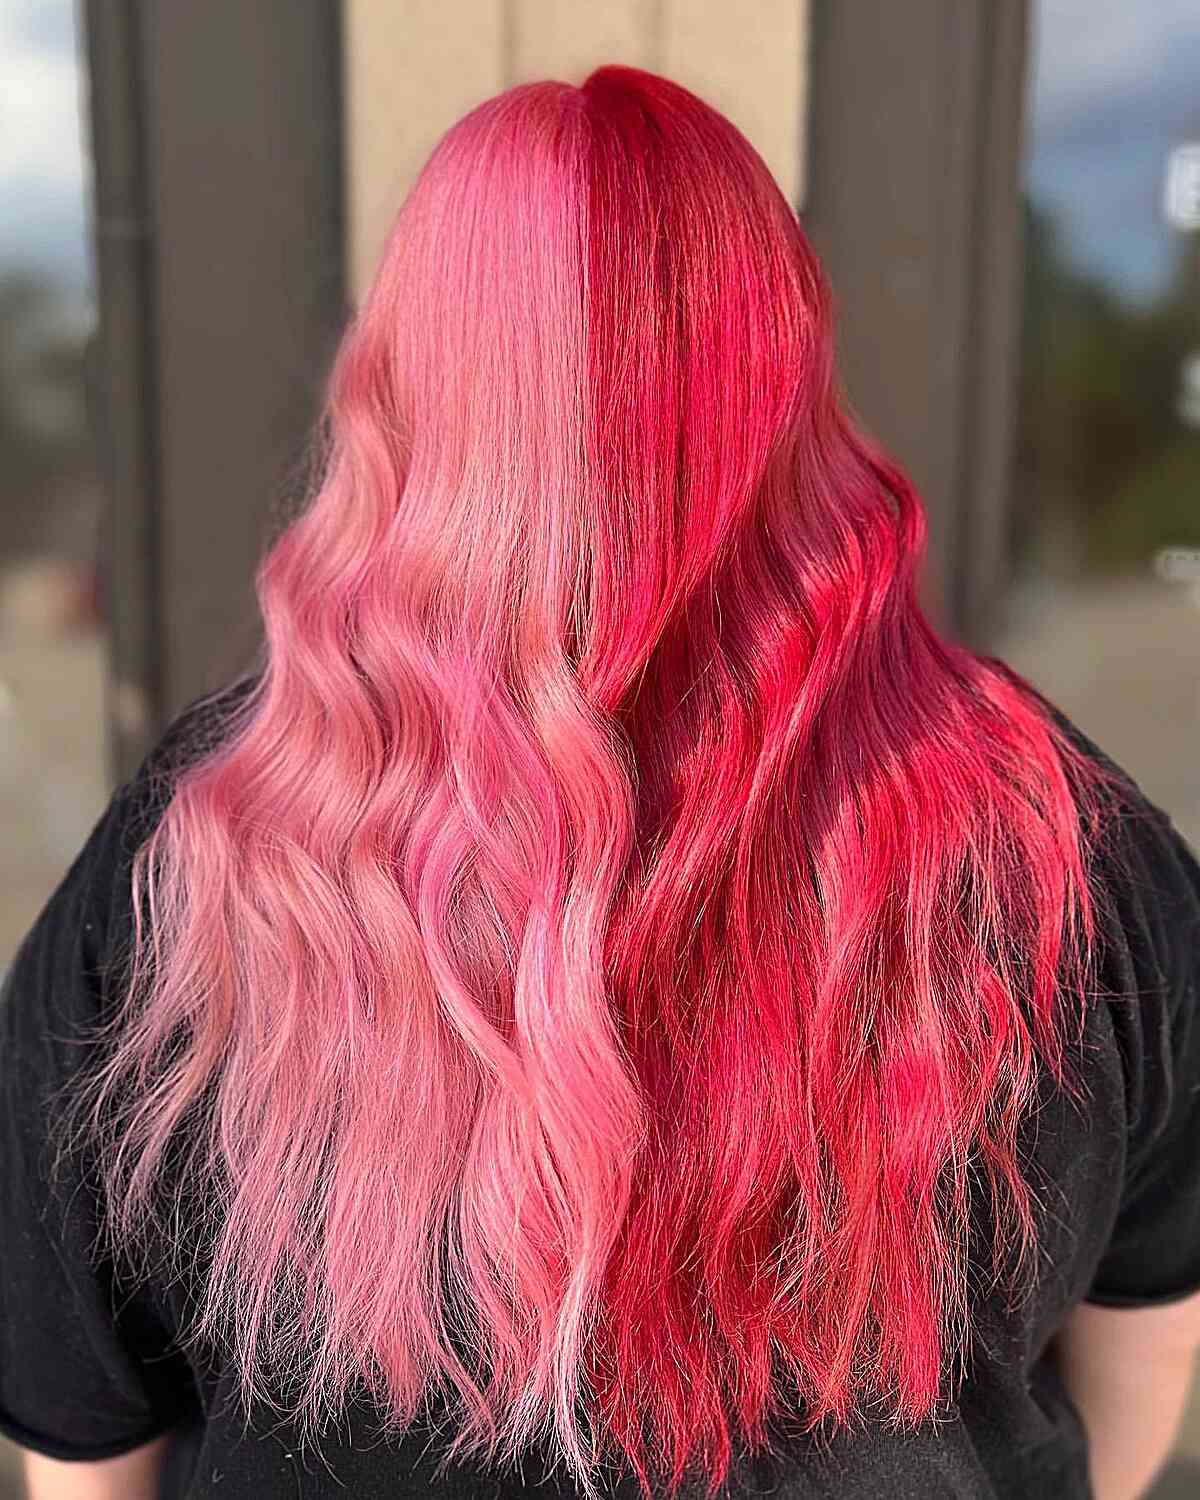 Light Pink and Bright Red Split Color for Very Long Hair